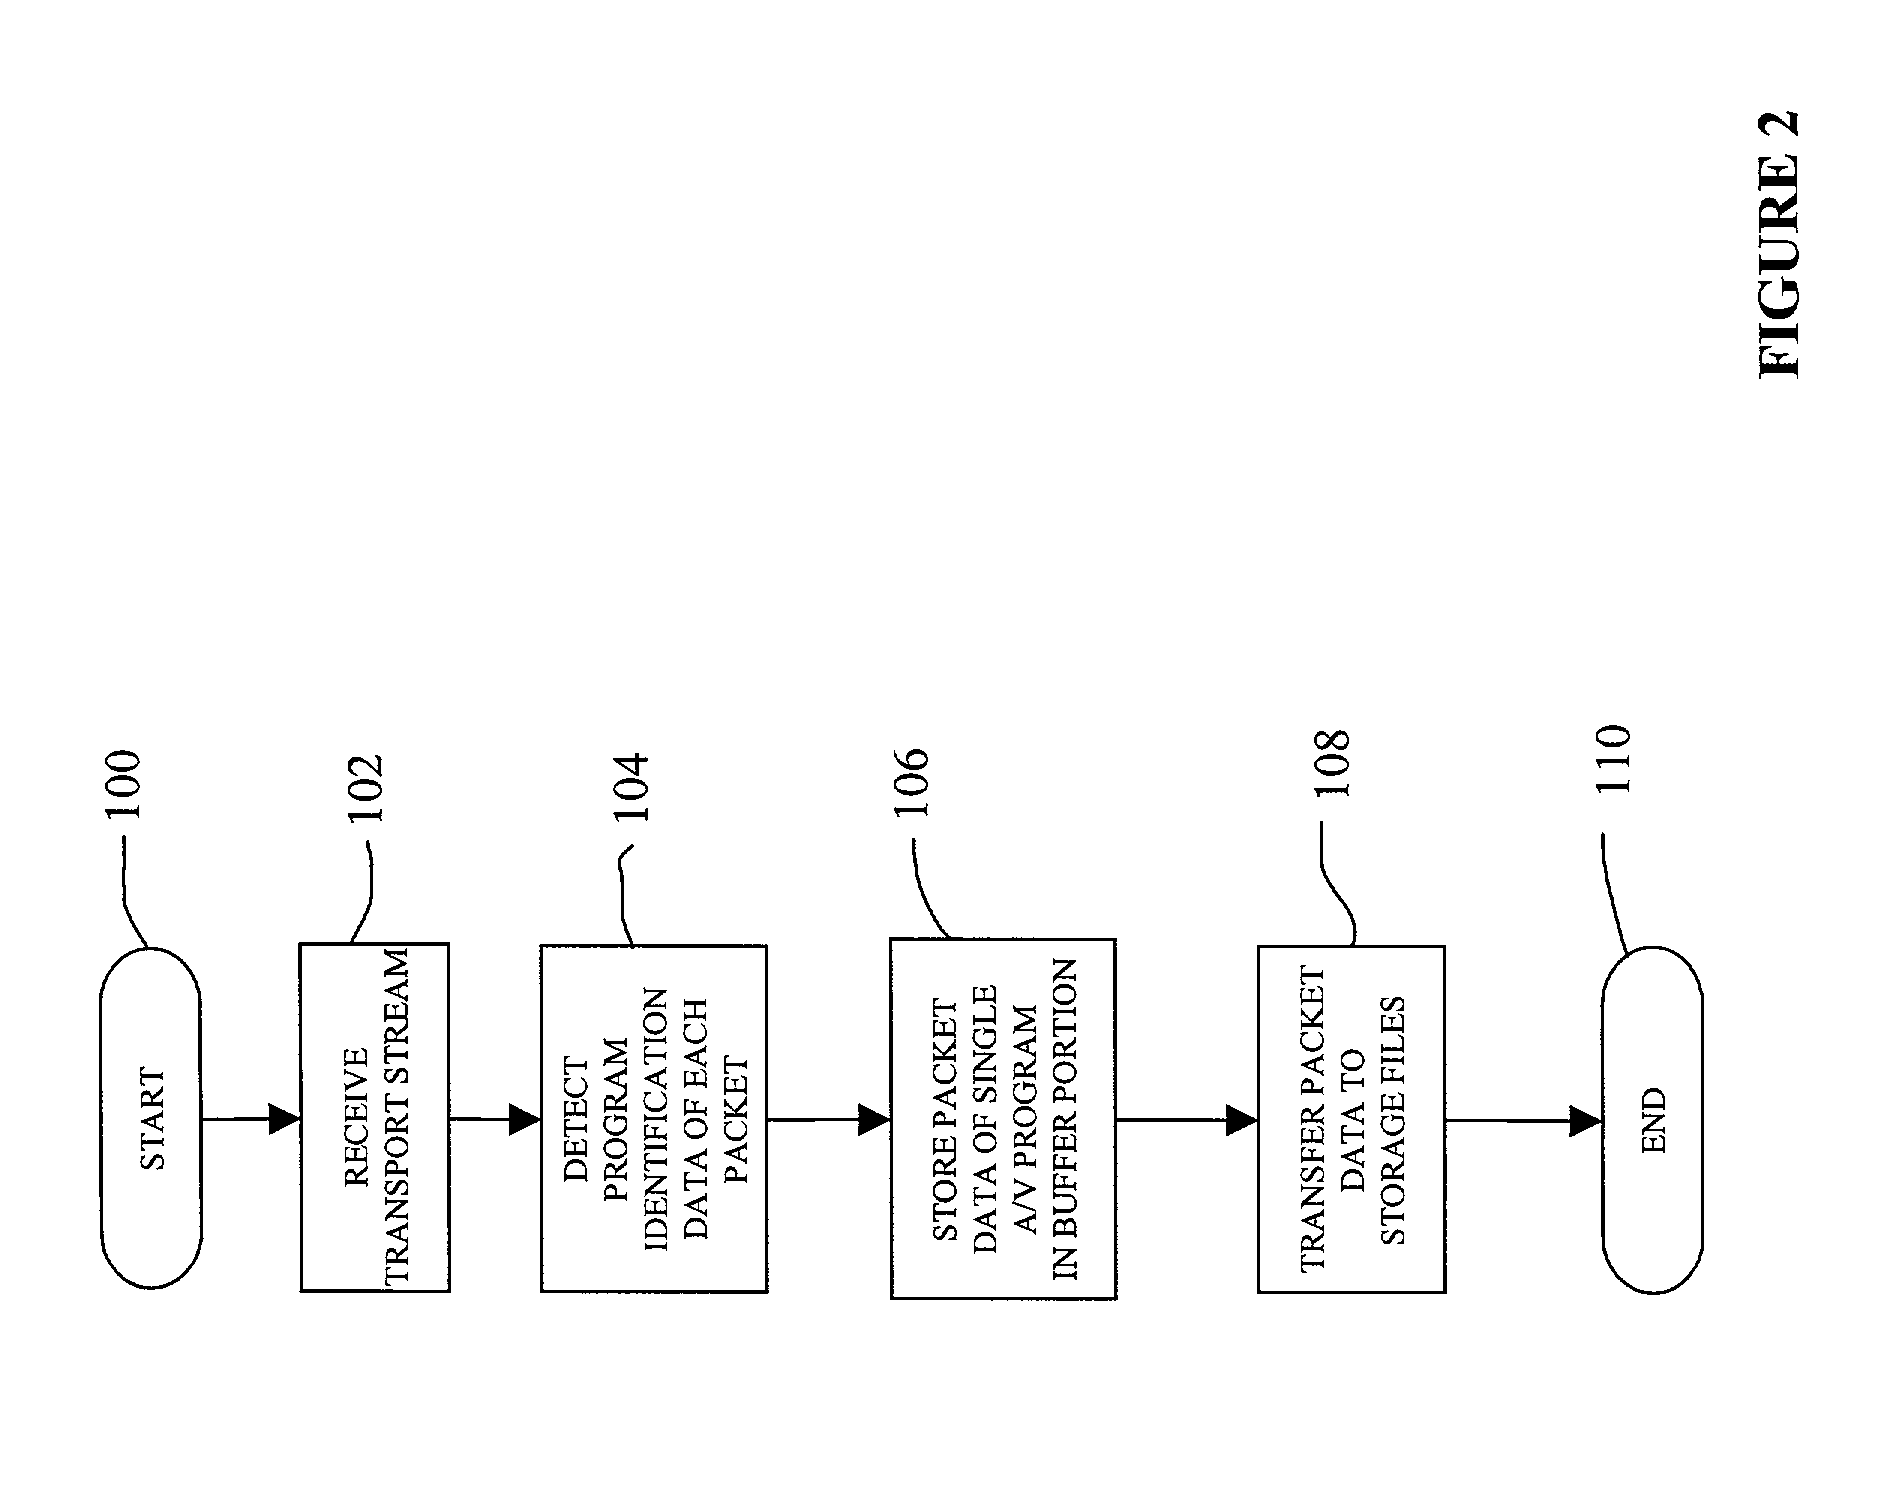 System and a method for storing audio/video programs on a hard disk drive for presentation to a viewer